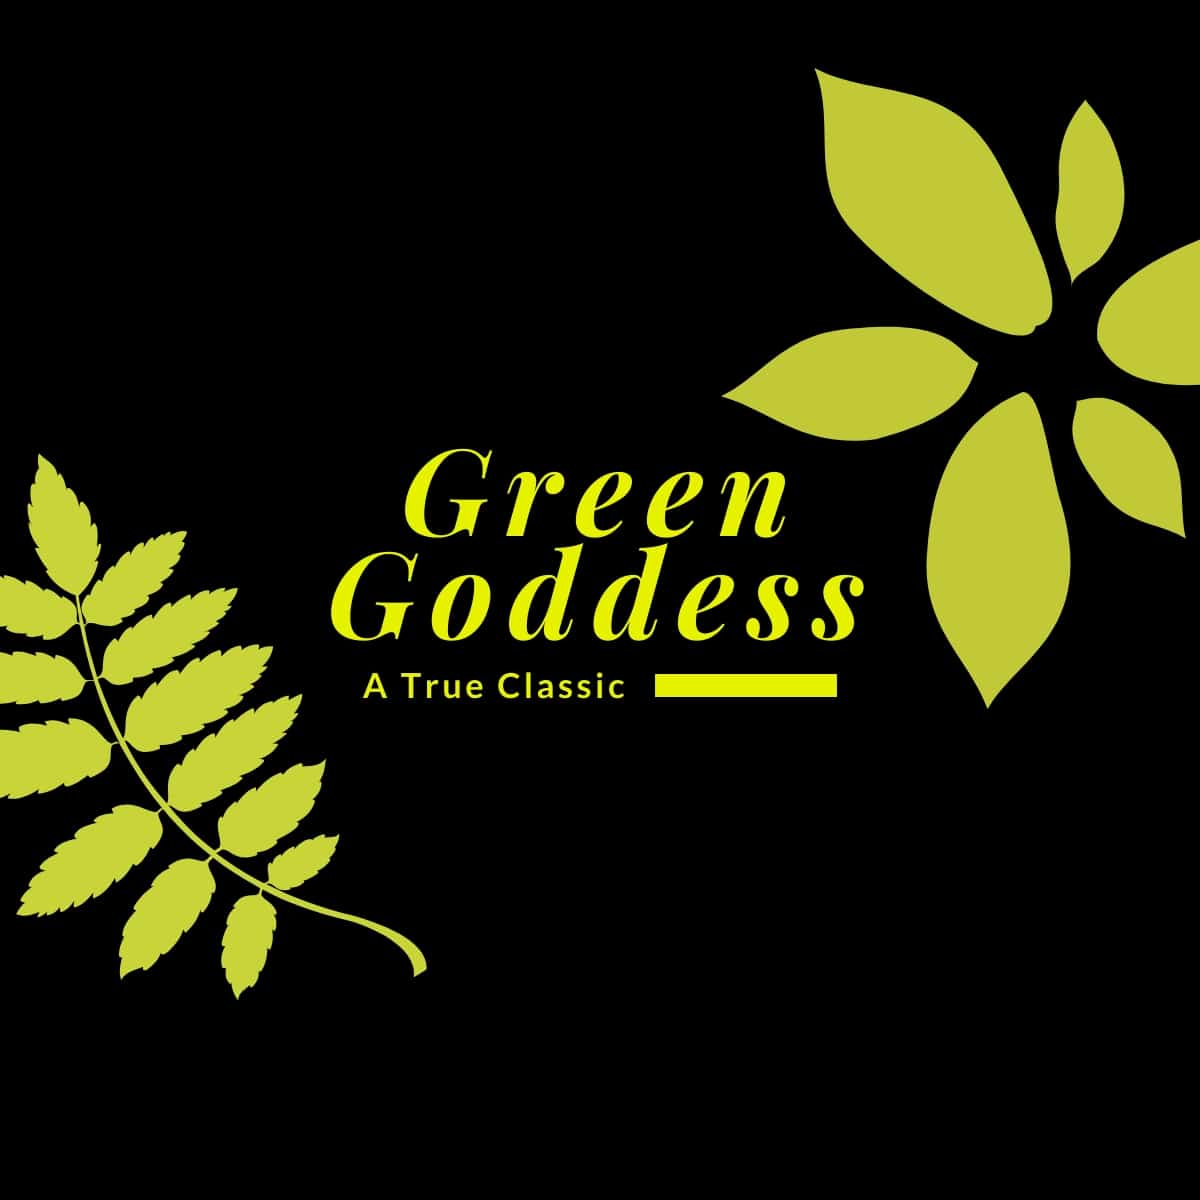 A black background with green leaves. The words "Green Goddess, A True Classic" are centered on the image.